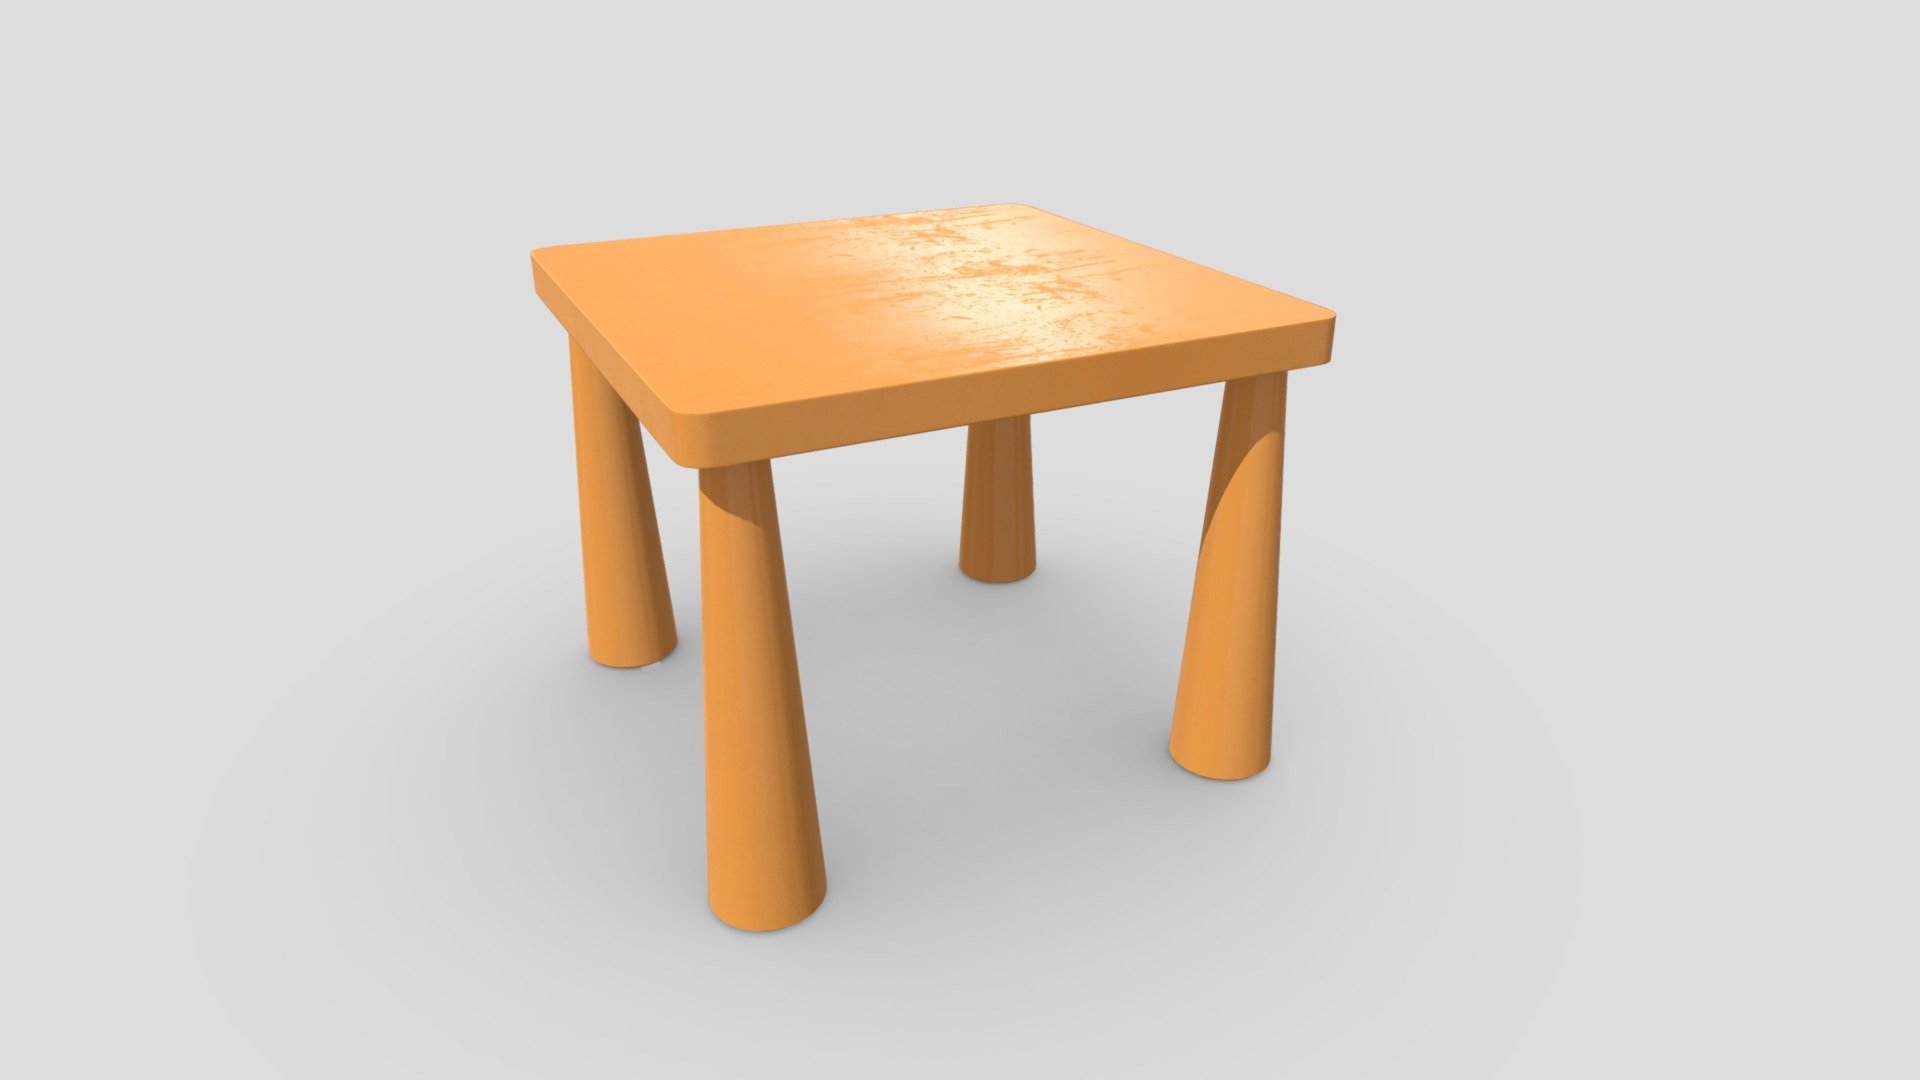 CC0 1.0 Universal (CC0 1.0) Public Domain Dedication 

‘It's tea time, sit down!’

● 4096 x 4096 PBR textures

● normal map is baked from the high poly model

If this model was helpful to you, please consider leaving a tip: https://www.paypal.com/biz/fund?id=V4VY8CLBVT4B4

Or you can support me on Patreon: https://www.patreon.com/plaggy

Please do not hesitate to contact with me. I will be happy to help you.

Contact: plaggy.net@gmail.com

Formats: .fbx, .dae, .max, .obj, .mtl, .png, .glTF, .USDZ Polygon: 430 Vertices: 484 Textures: Yes, PBR (ao, albedo, metal, normal, ORM, rough) Materials: Yes UV Mapped: Yes Unwrapped UVs: Yes (non overlapping) - CC0 - Table 6 - Download Free 3D model by plaggy 3d model